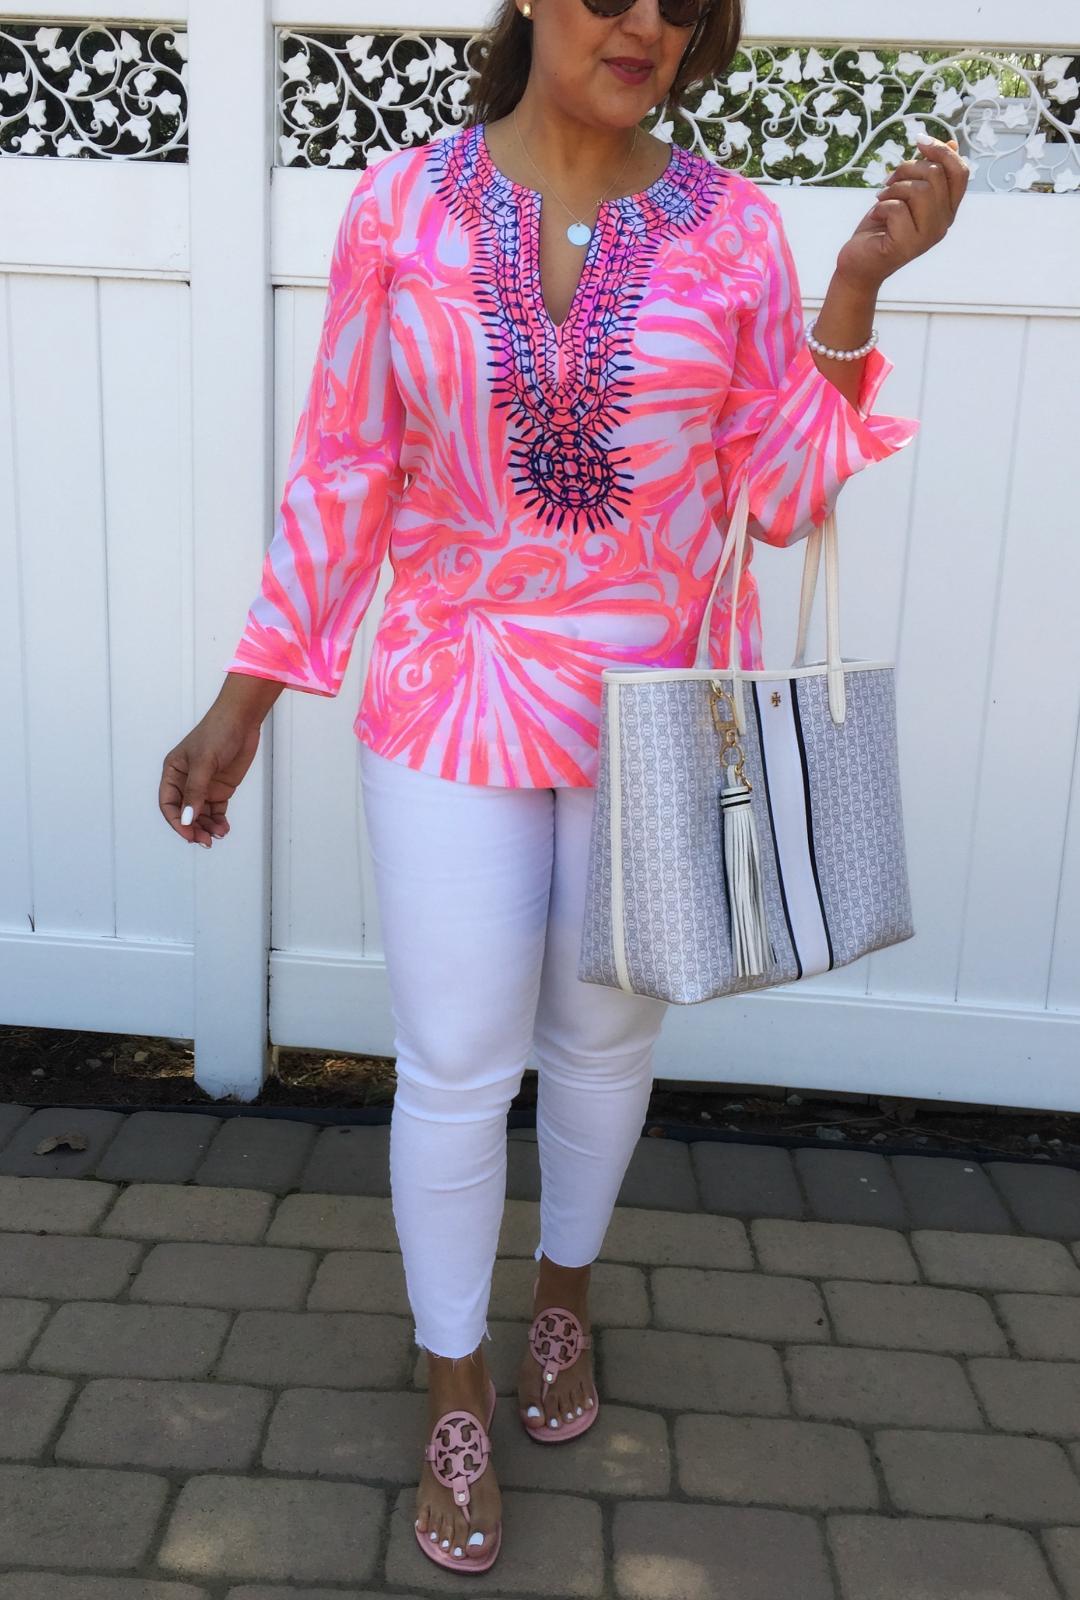 Lilly Pulitzer tops.